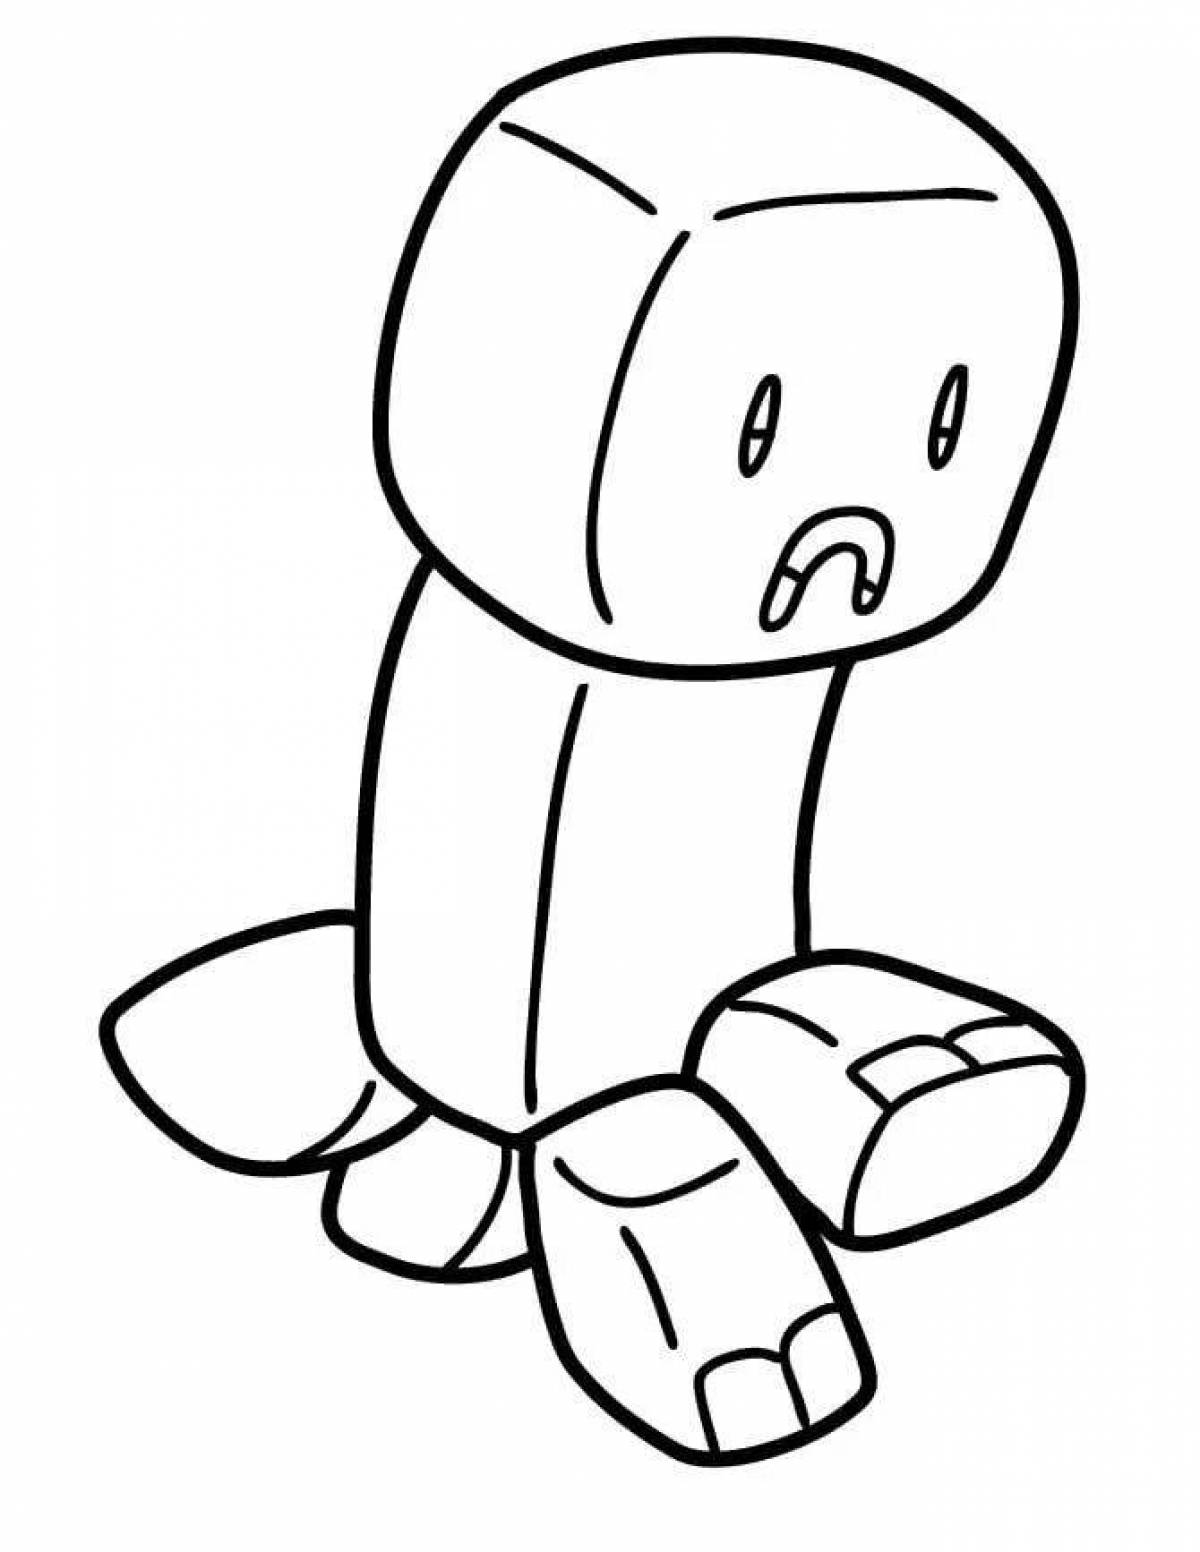 Sweet creeper coloring page